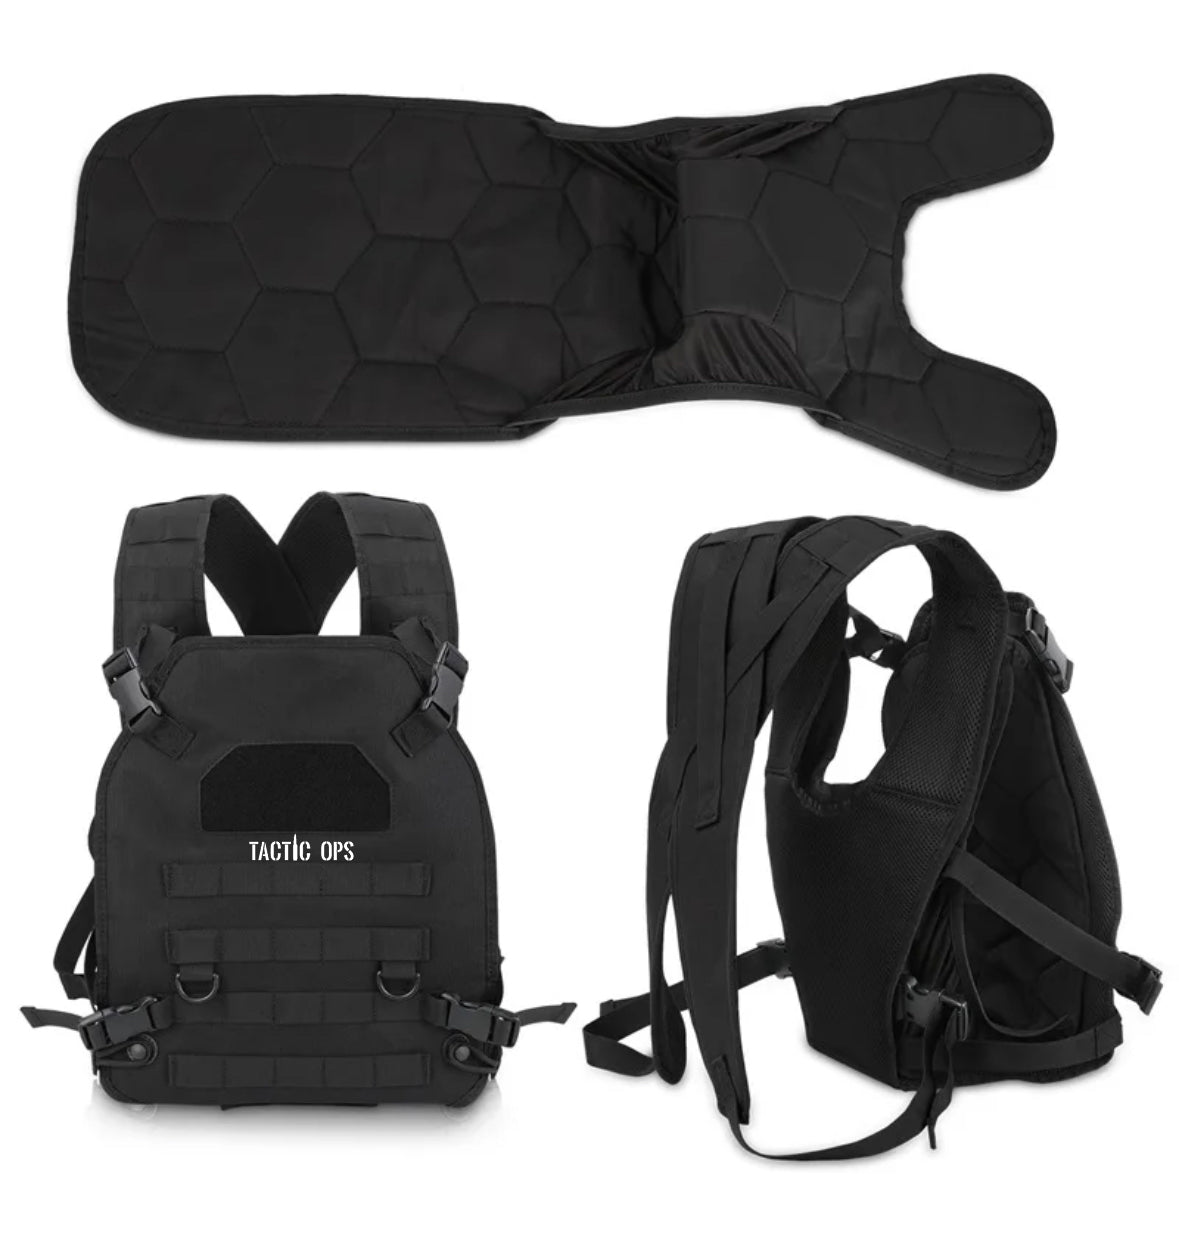 Tactic Ops Tactical Baby Carrier Black